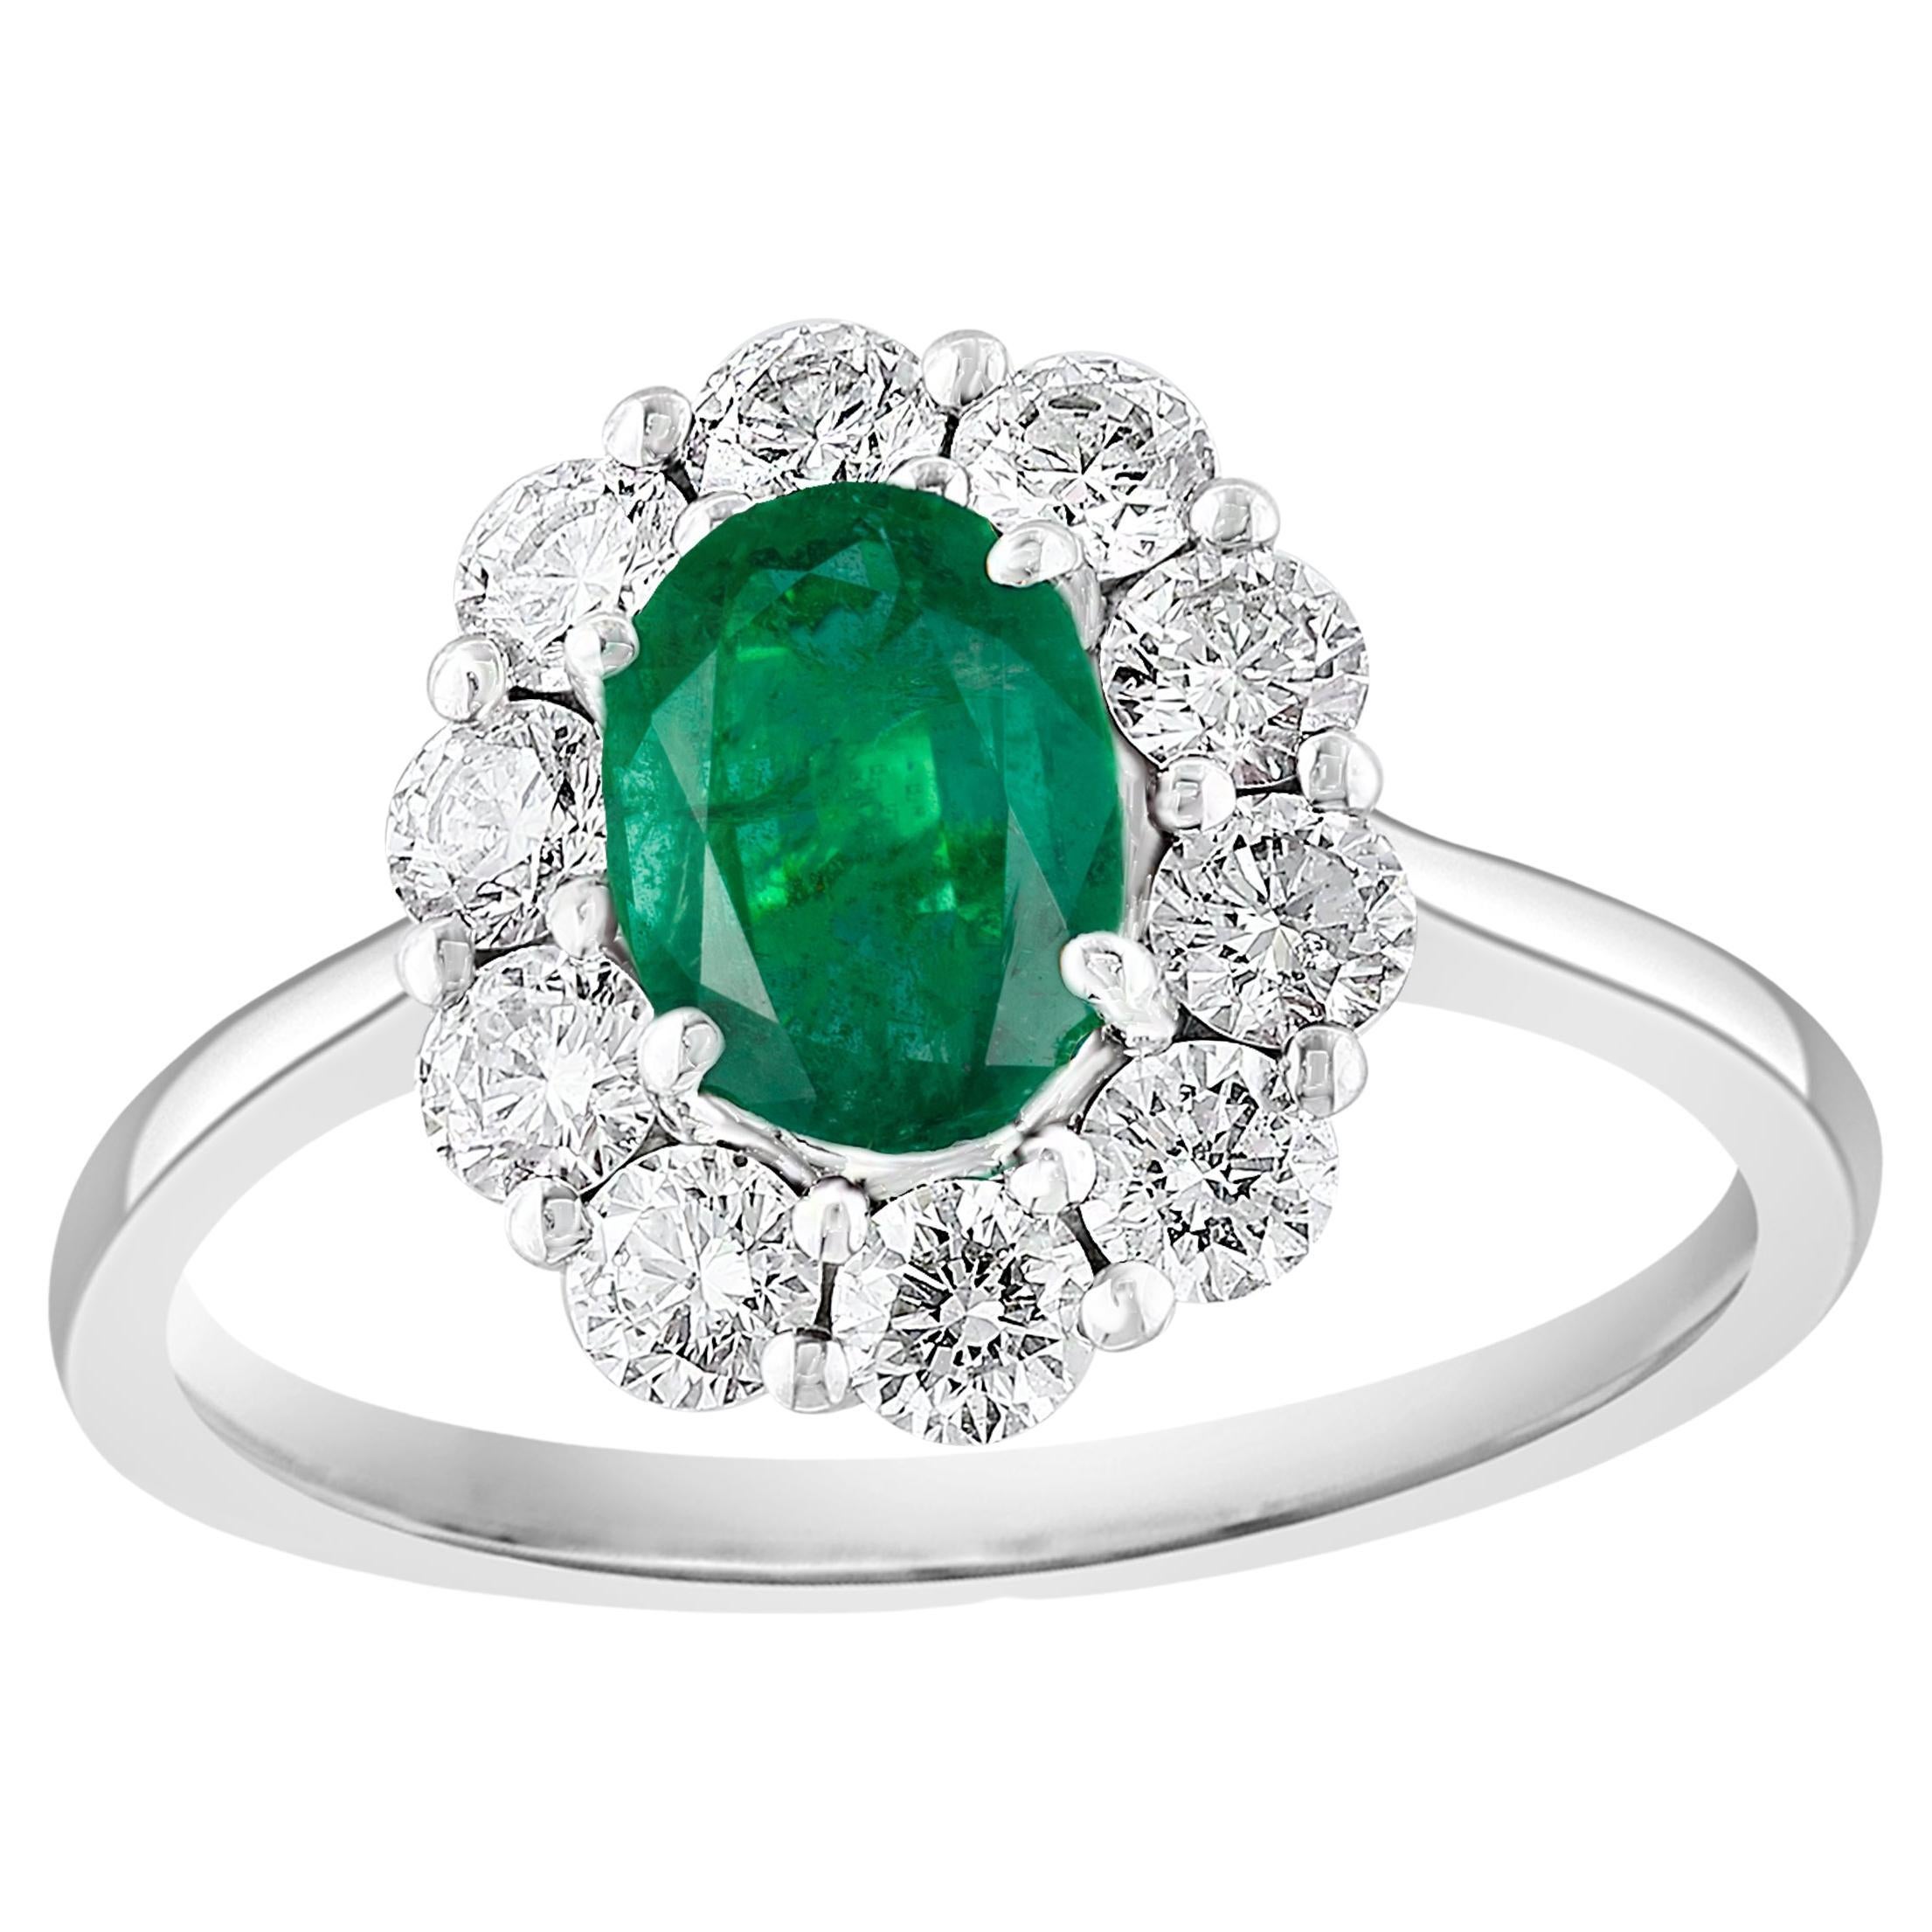 0.68 Carat Oval Cut Emerald and Diamond Ring in 18k White Gold For Sale